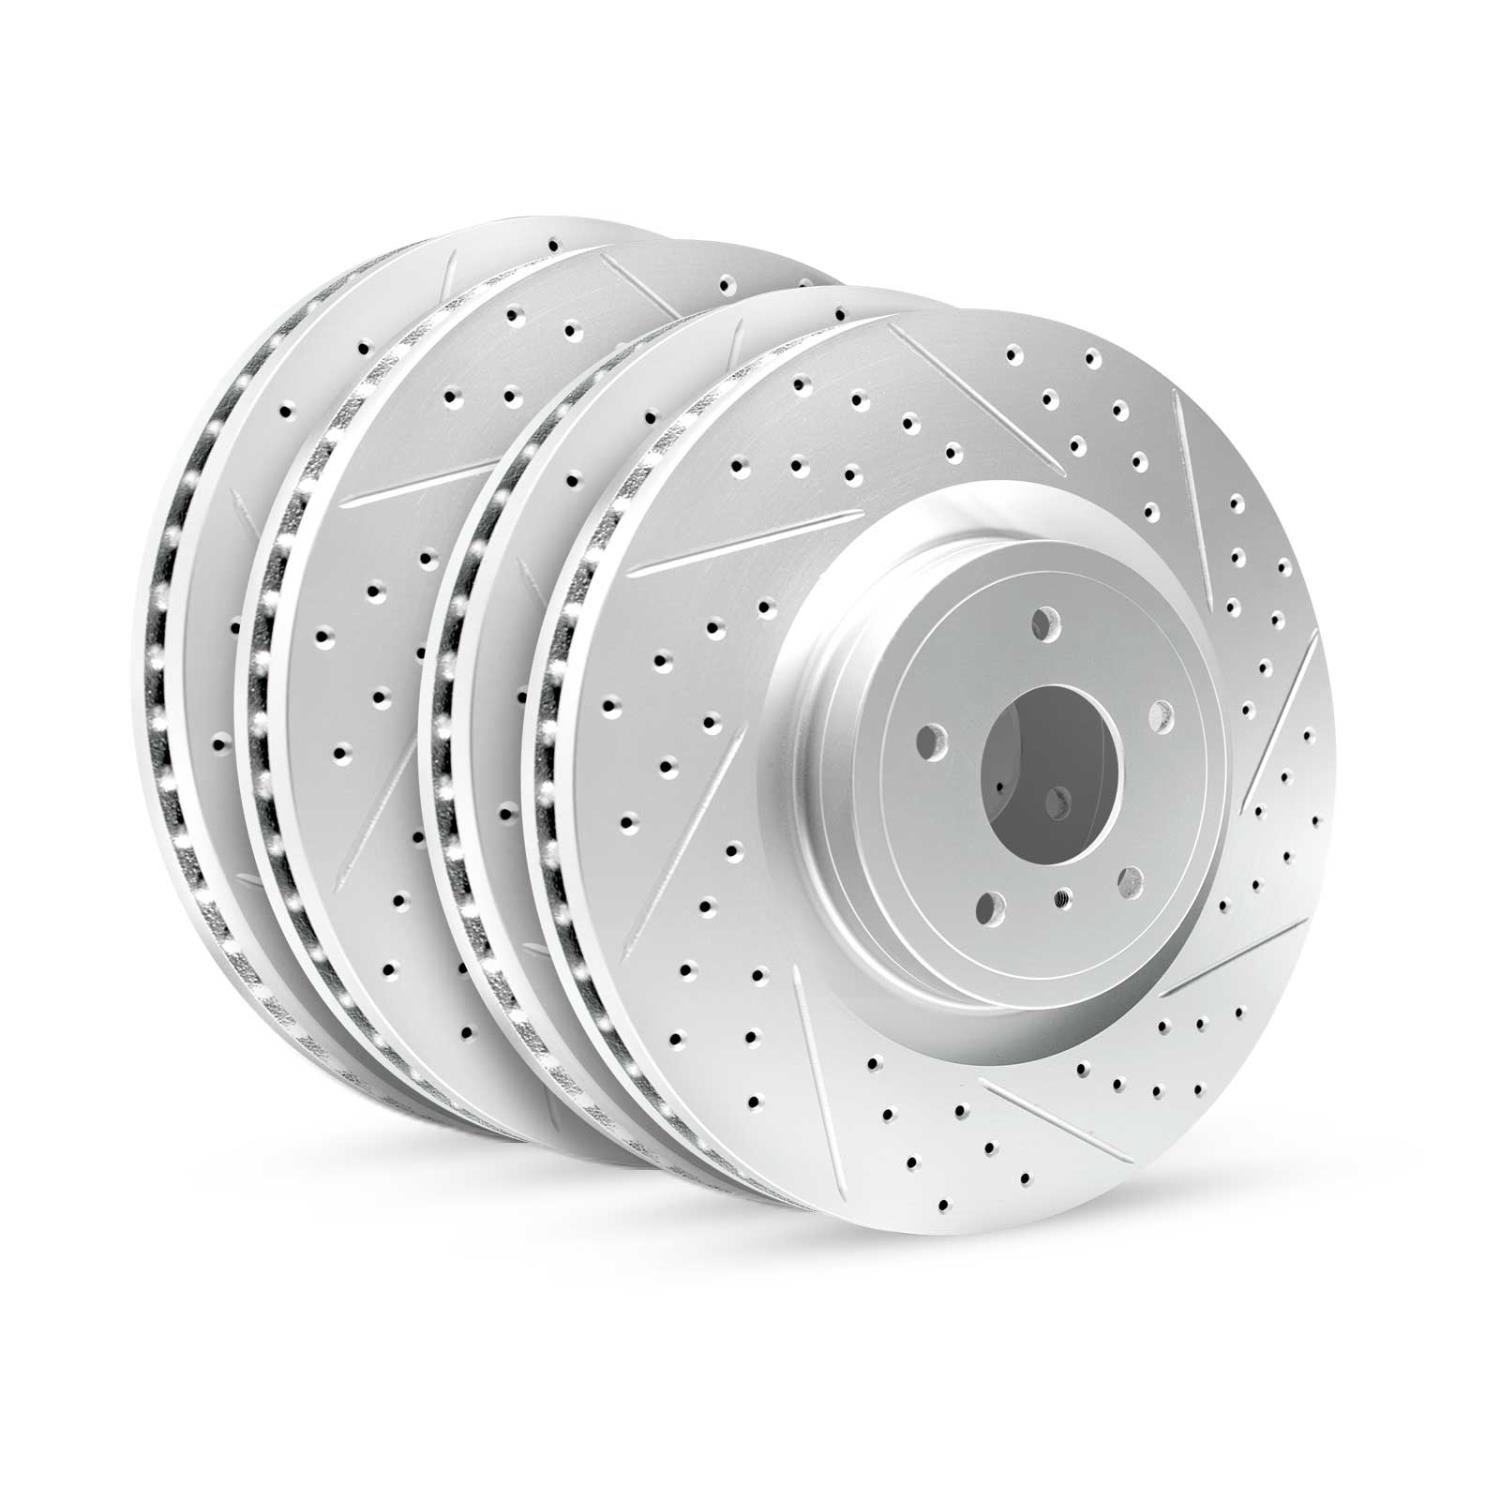 GEO-Carbon Drilled/Slotted Rotors, 2009-2014 Kia/Hyundai/Genesis, Position: Front/Rear